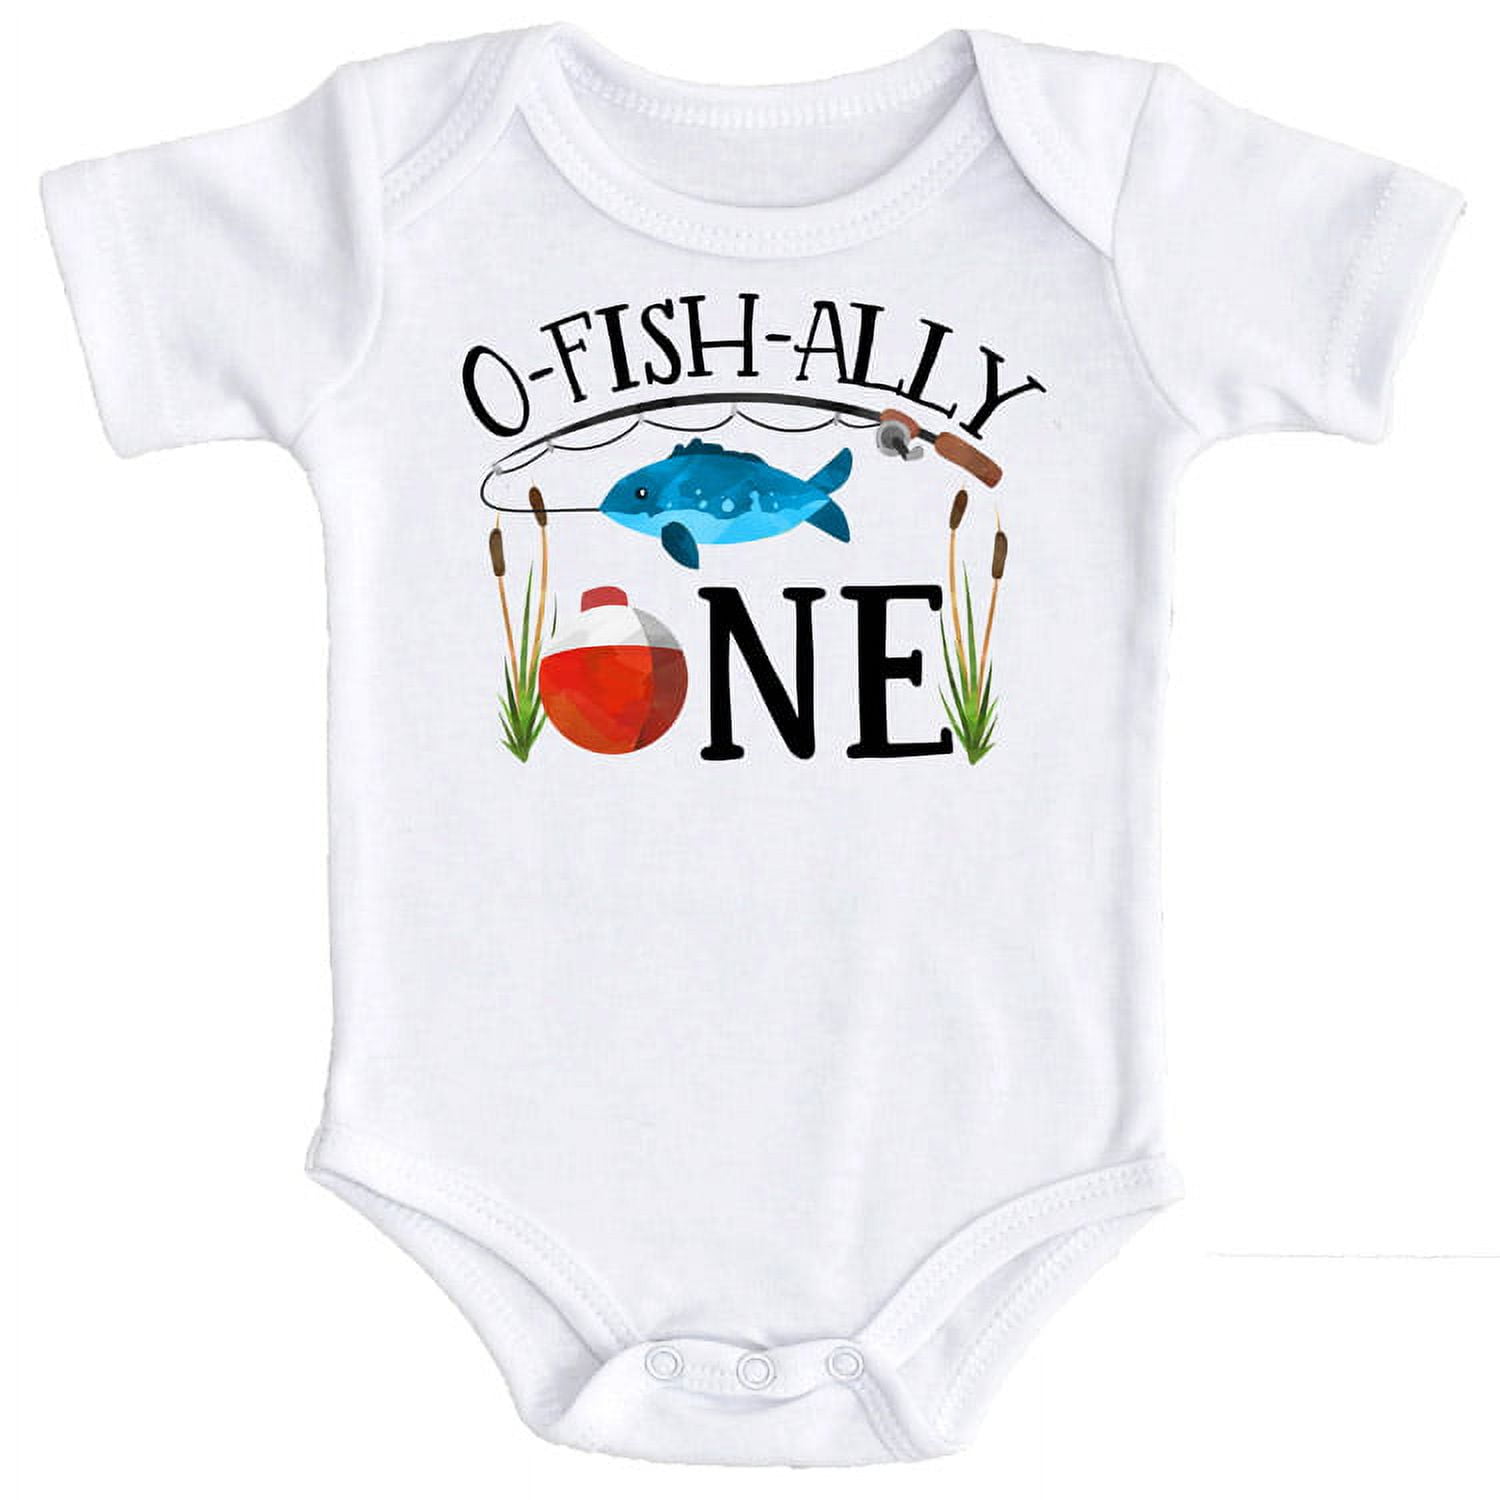 O-Fish-Ally One Bodysuit for Baby Boys Fishing Themed First Birthday Outfit  White Bodysuit 